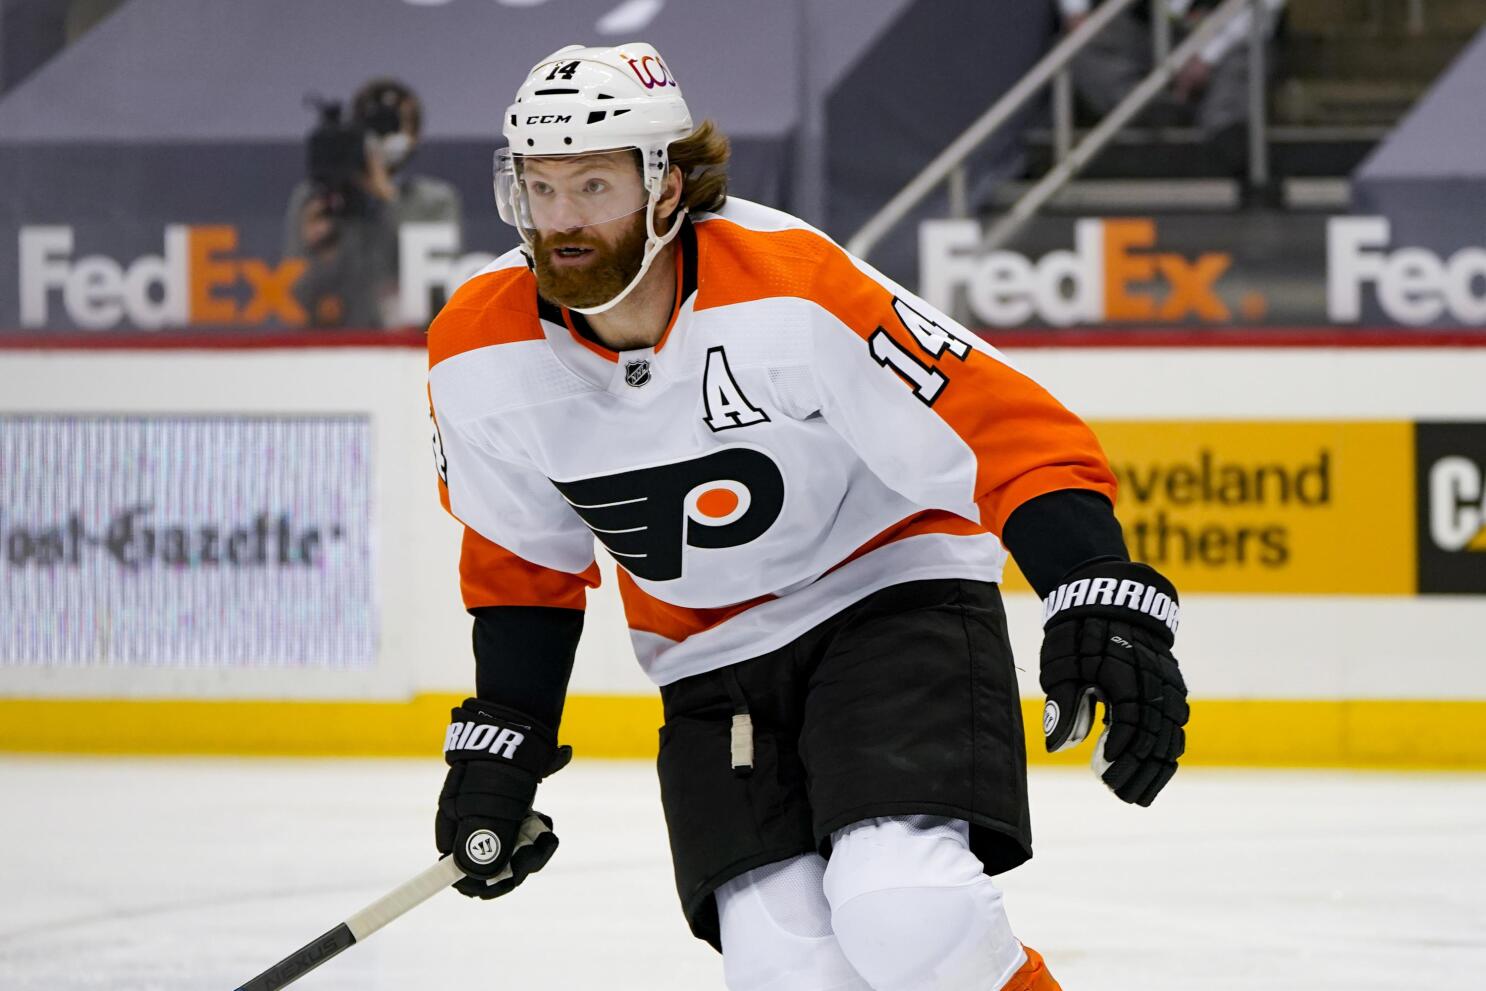 A step back to move forward: A look at the Flyers' defensive depth